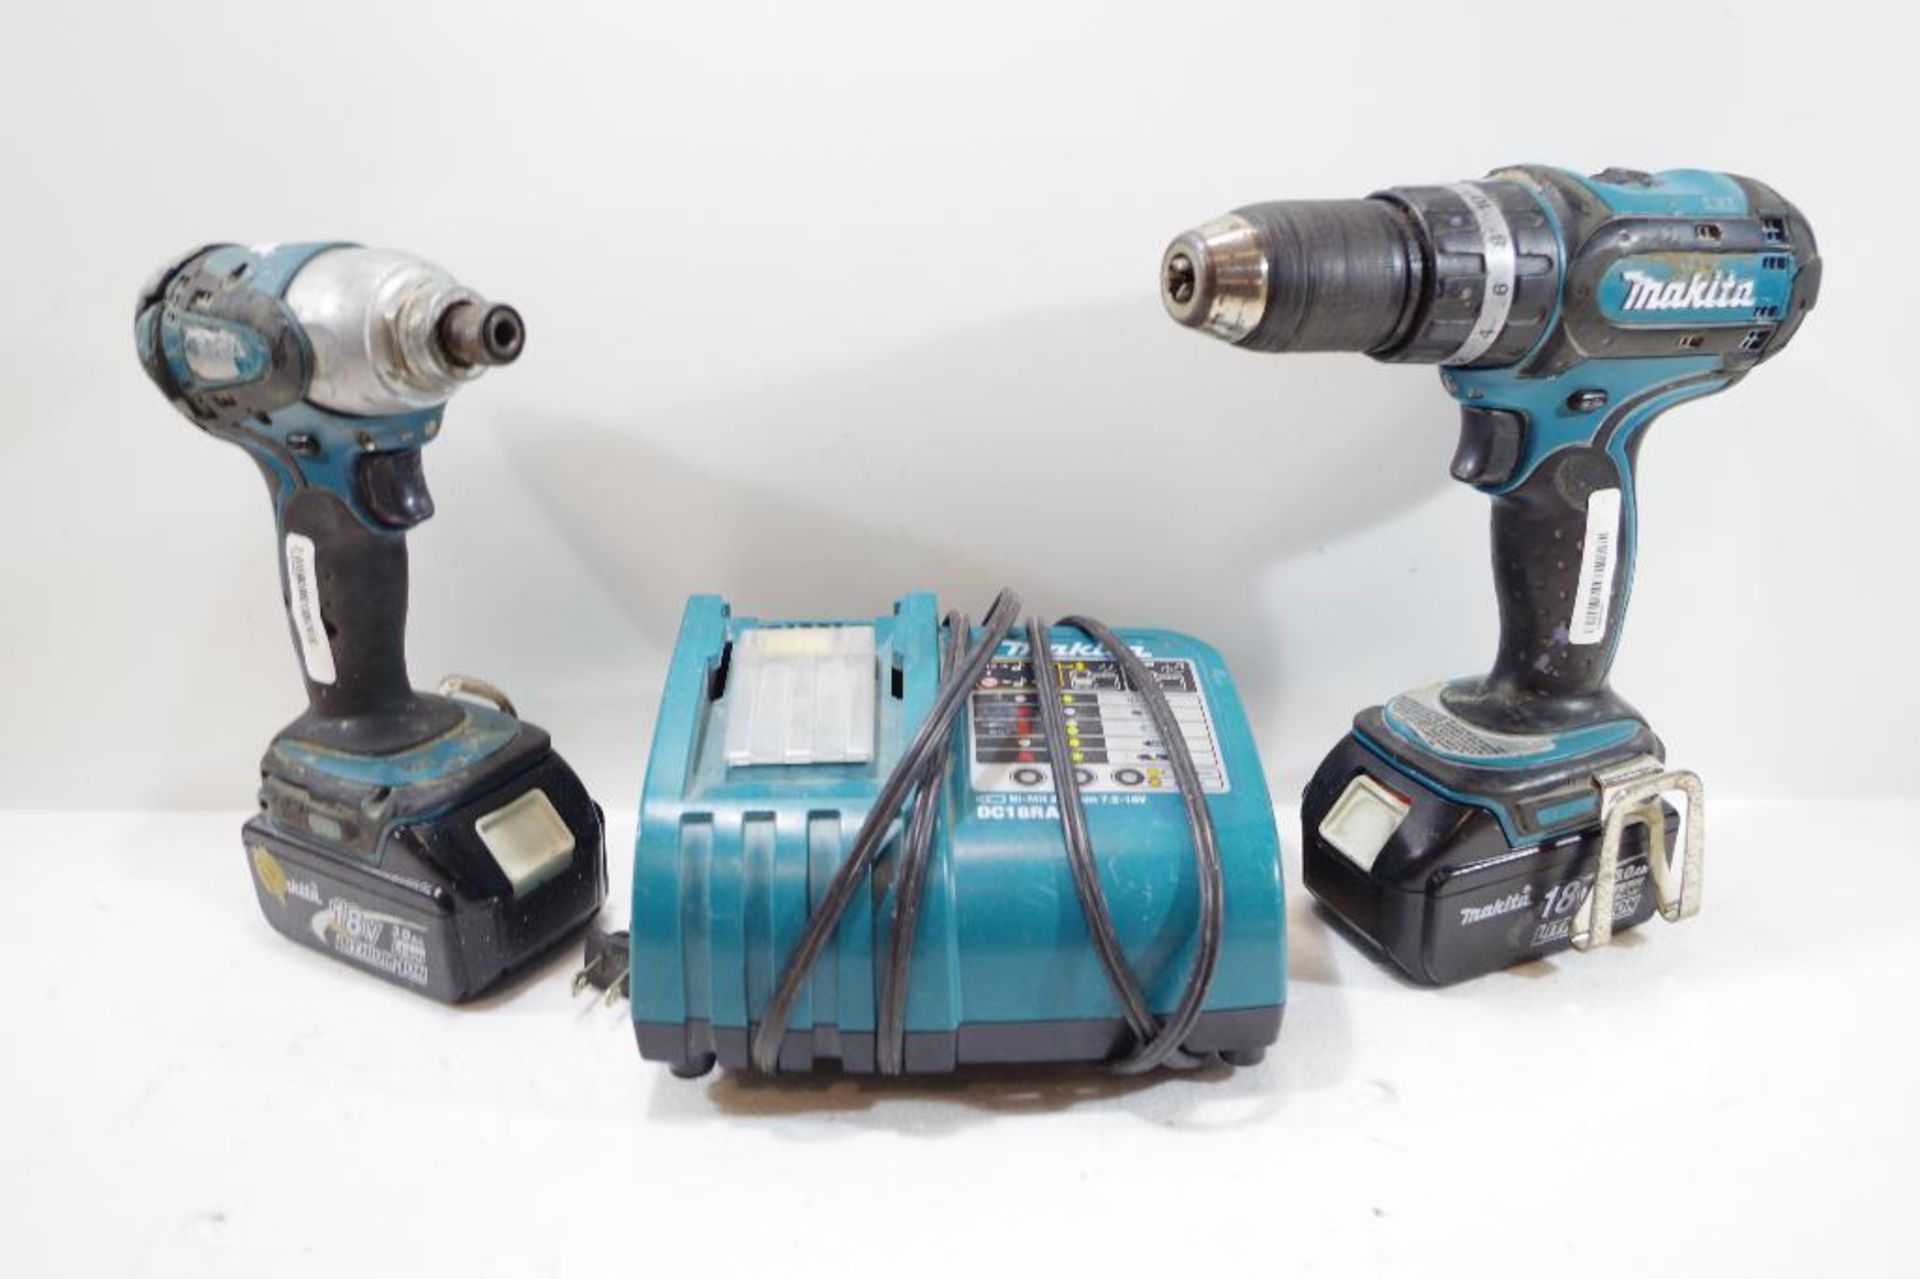 [5] MAKITA 18V Tools or Accessories: Drill Driver, Impact Driver, (2) Batteries & Charger